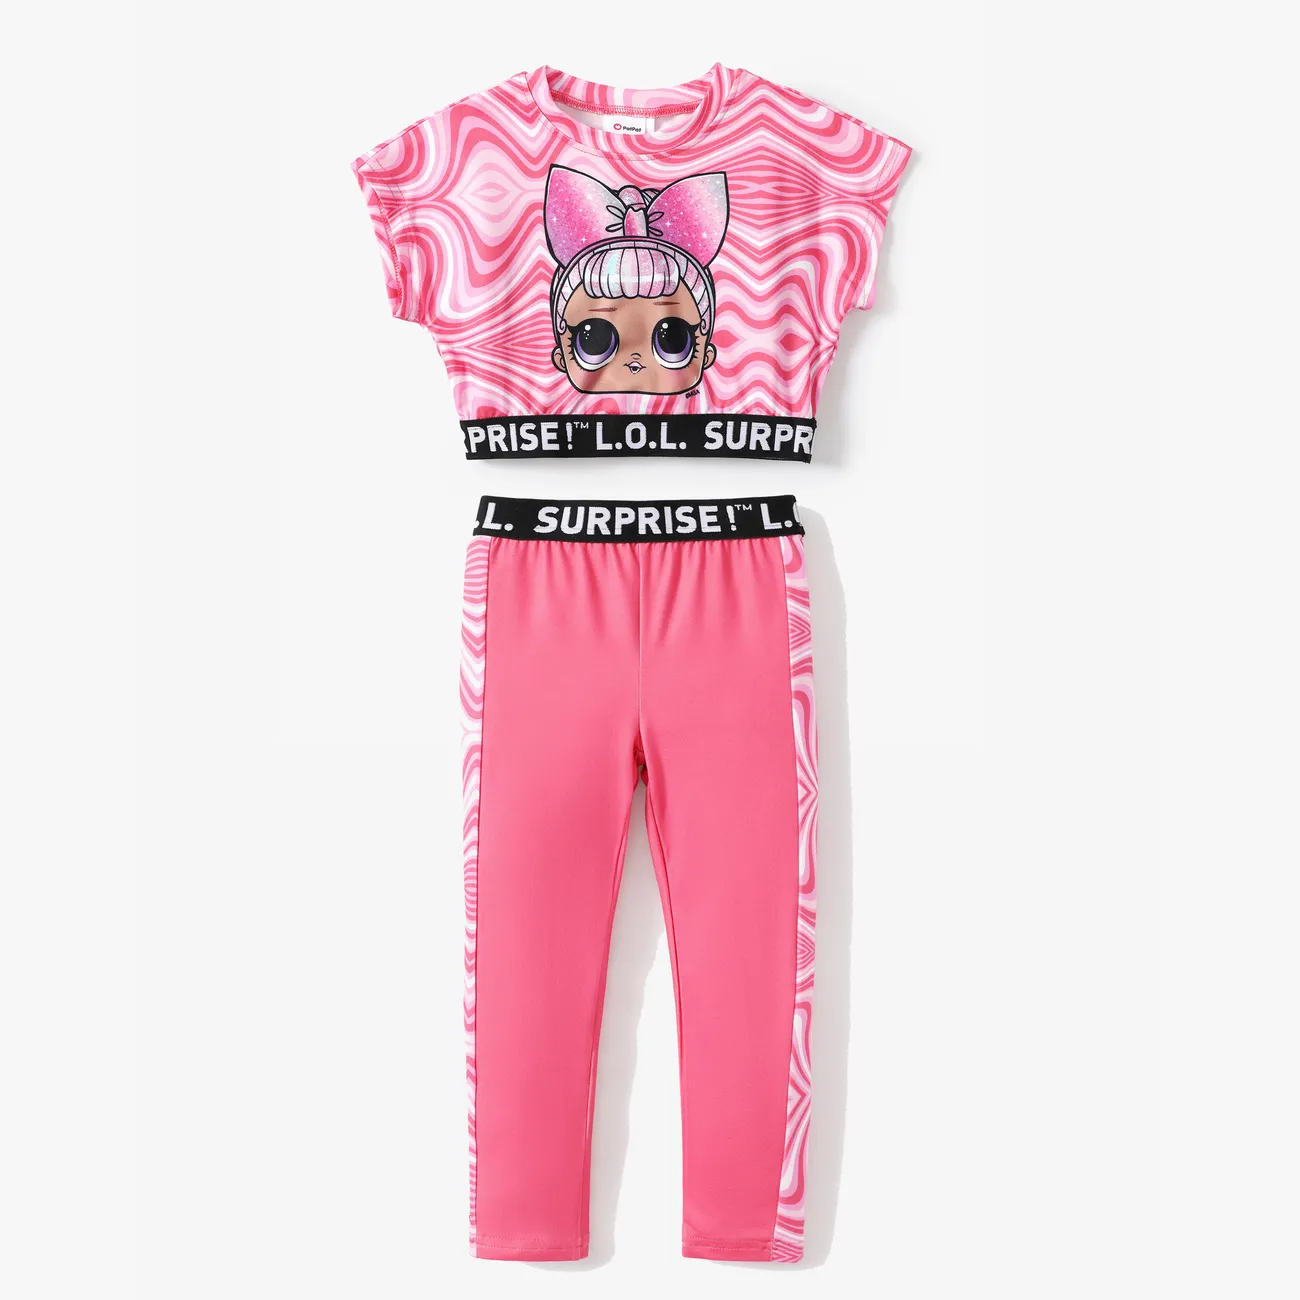 L.O.L. SURPRISE! Toddler/Kid Girls 2pcs Magical Line Character Print Tee with Pants Sporty Set Pink big image 1